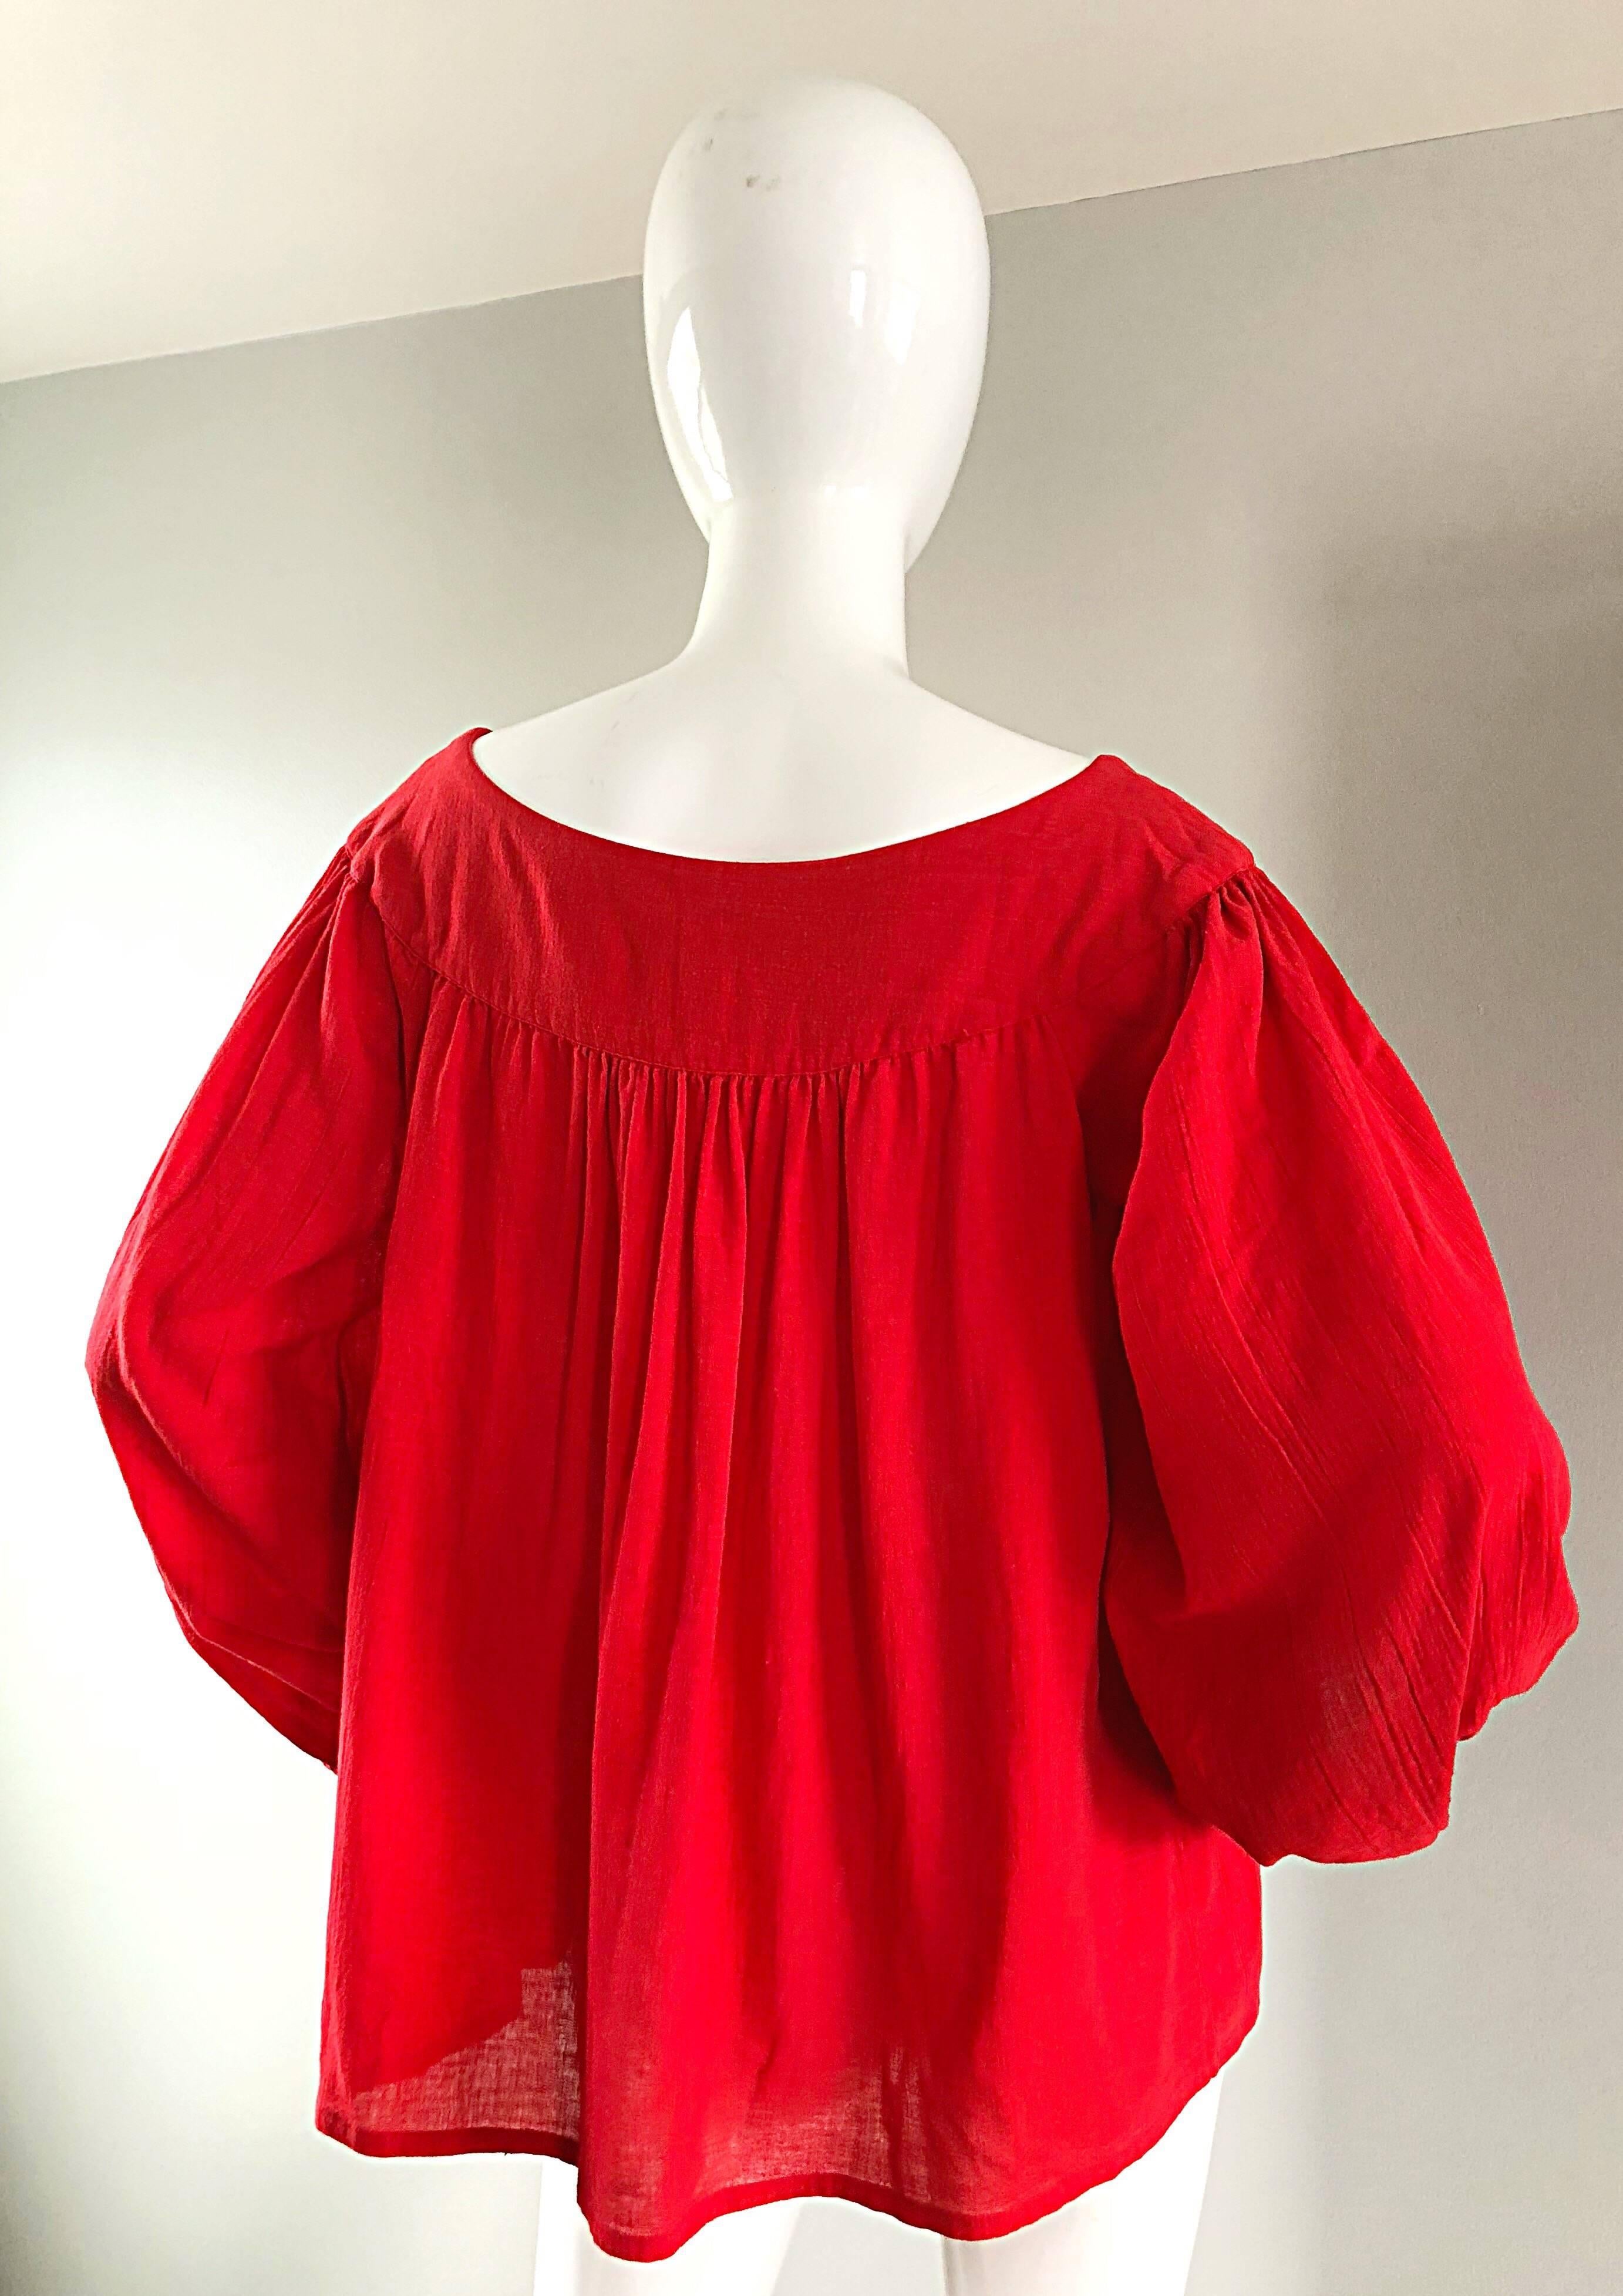 1970s Yves Saint Laurent Russian Collection Lipstick Red Boho Peasant Blouse Top 1